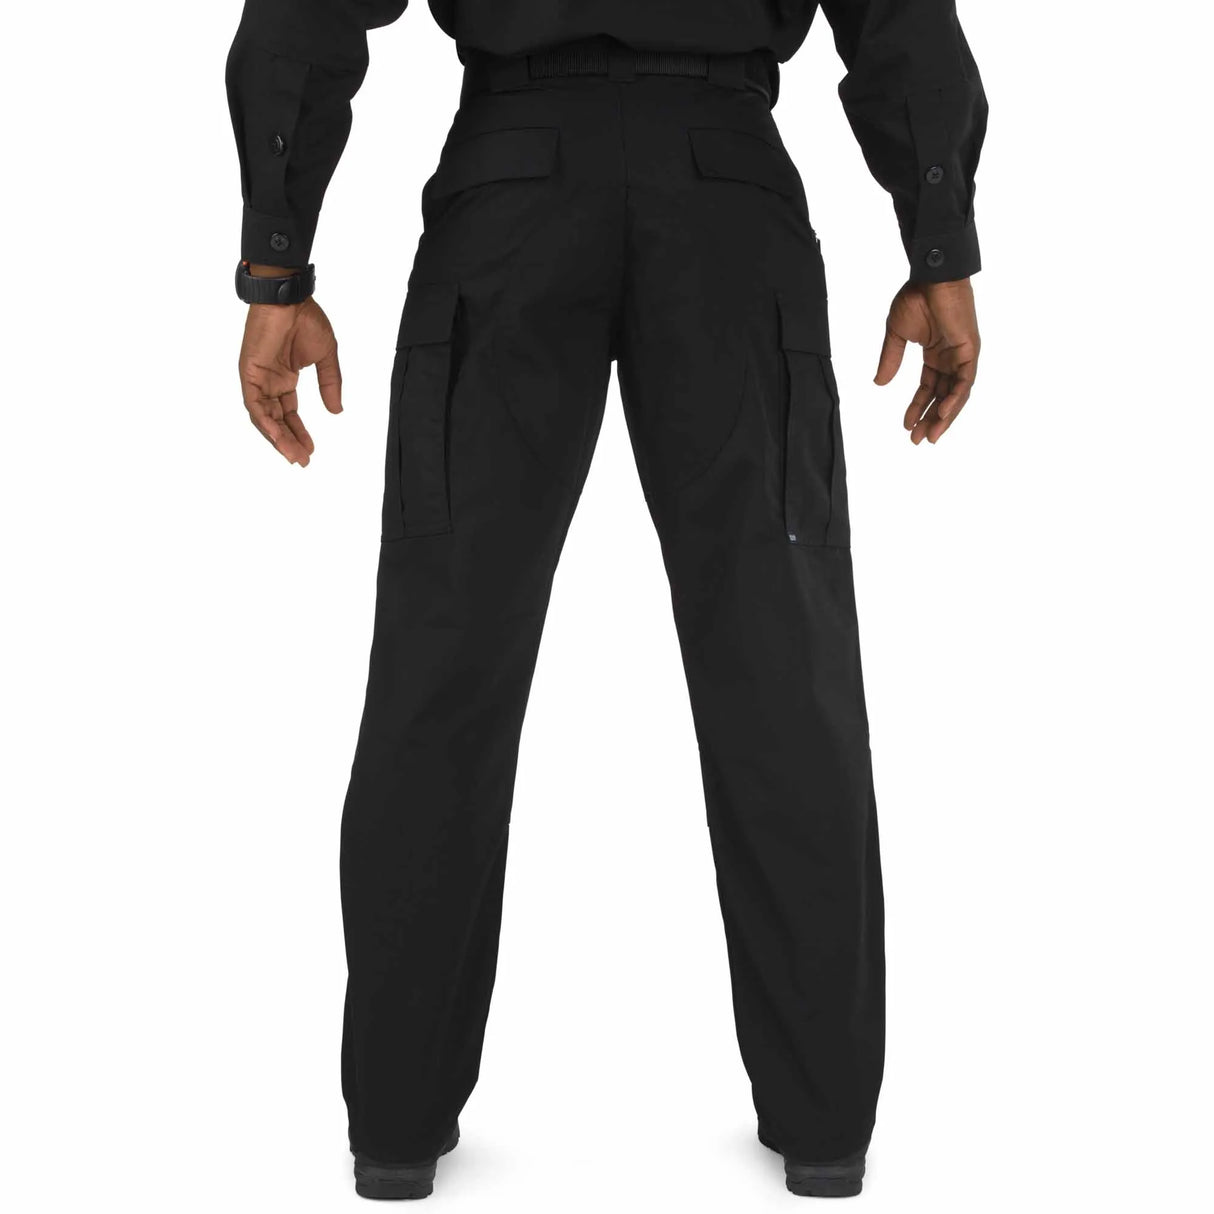 Secure Pocket Design Pant: Features secure pockets to keep valuables safe during missions.